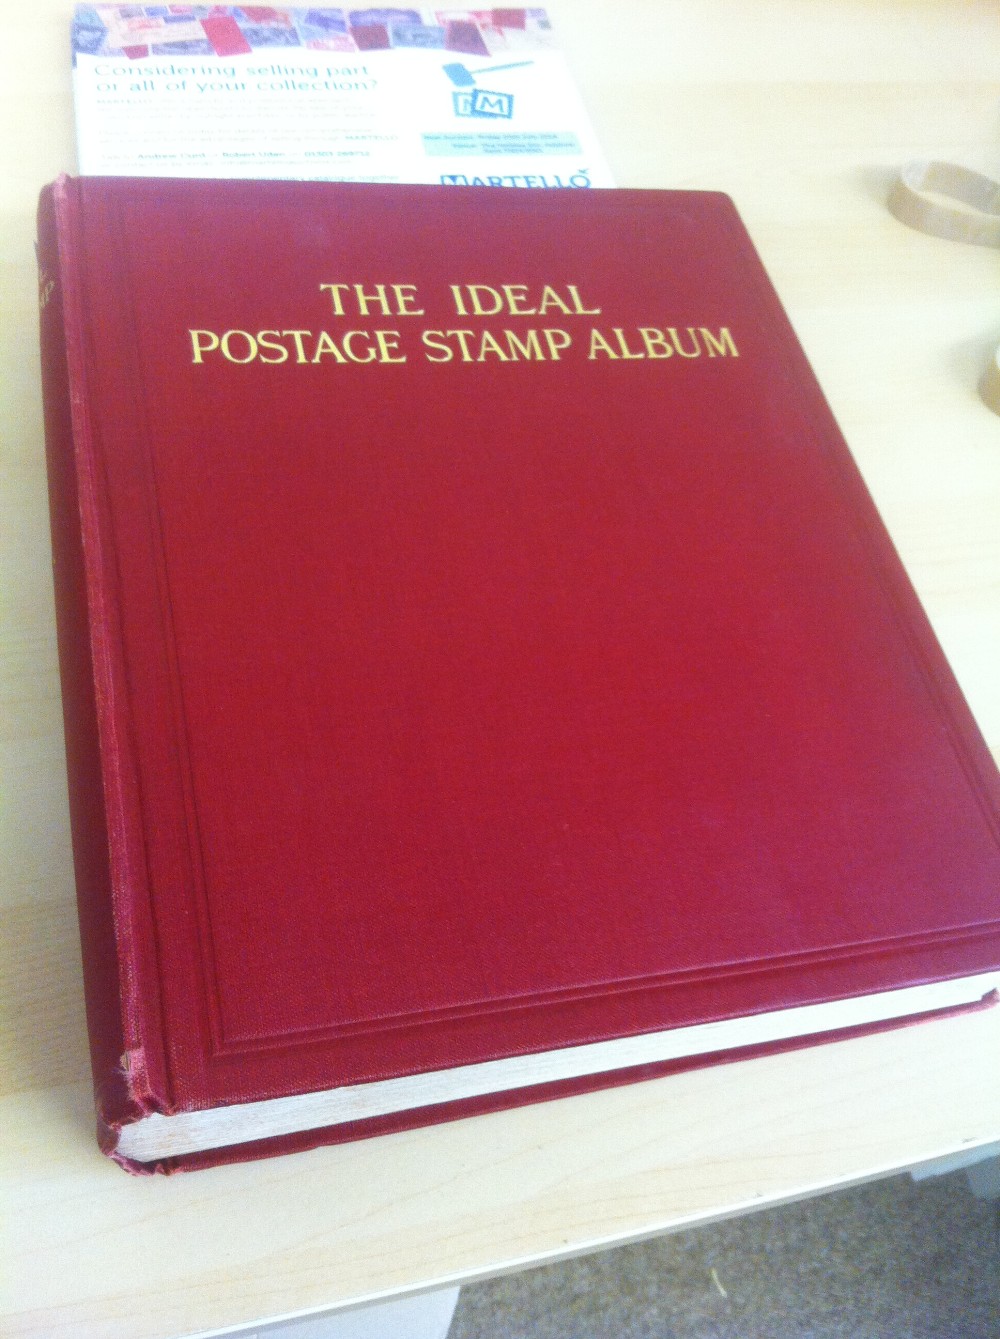 Printed Ideal album, eighth edition, sparsely filled but great for expansion and much sought after.